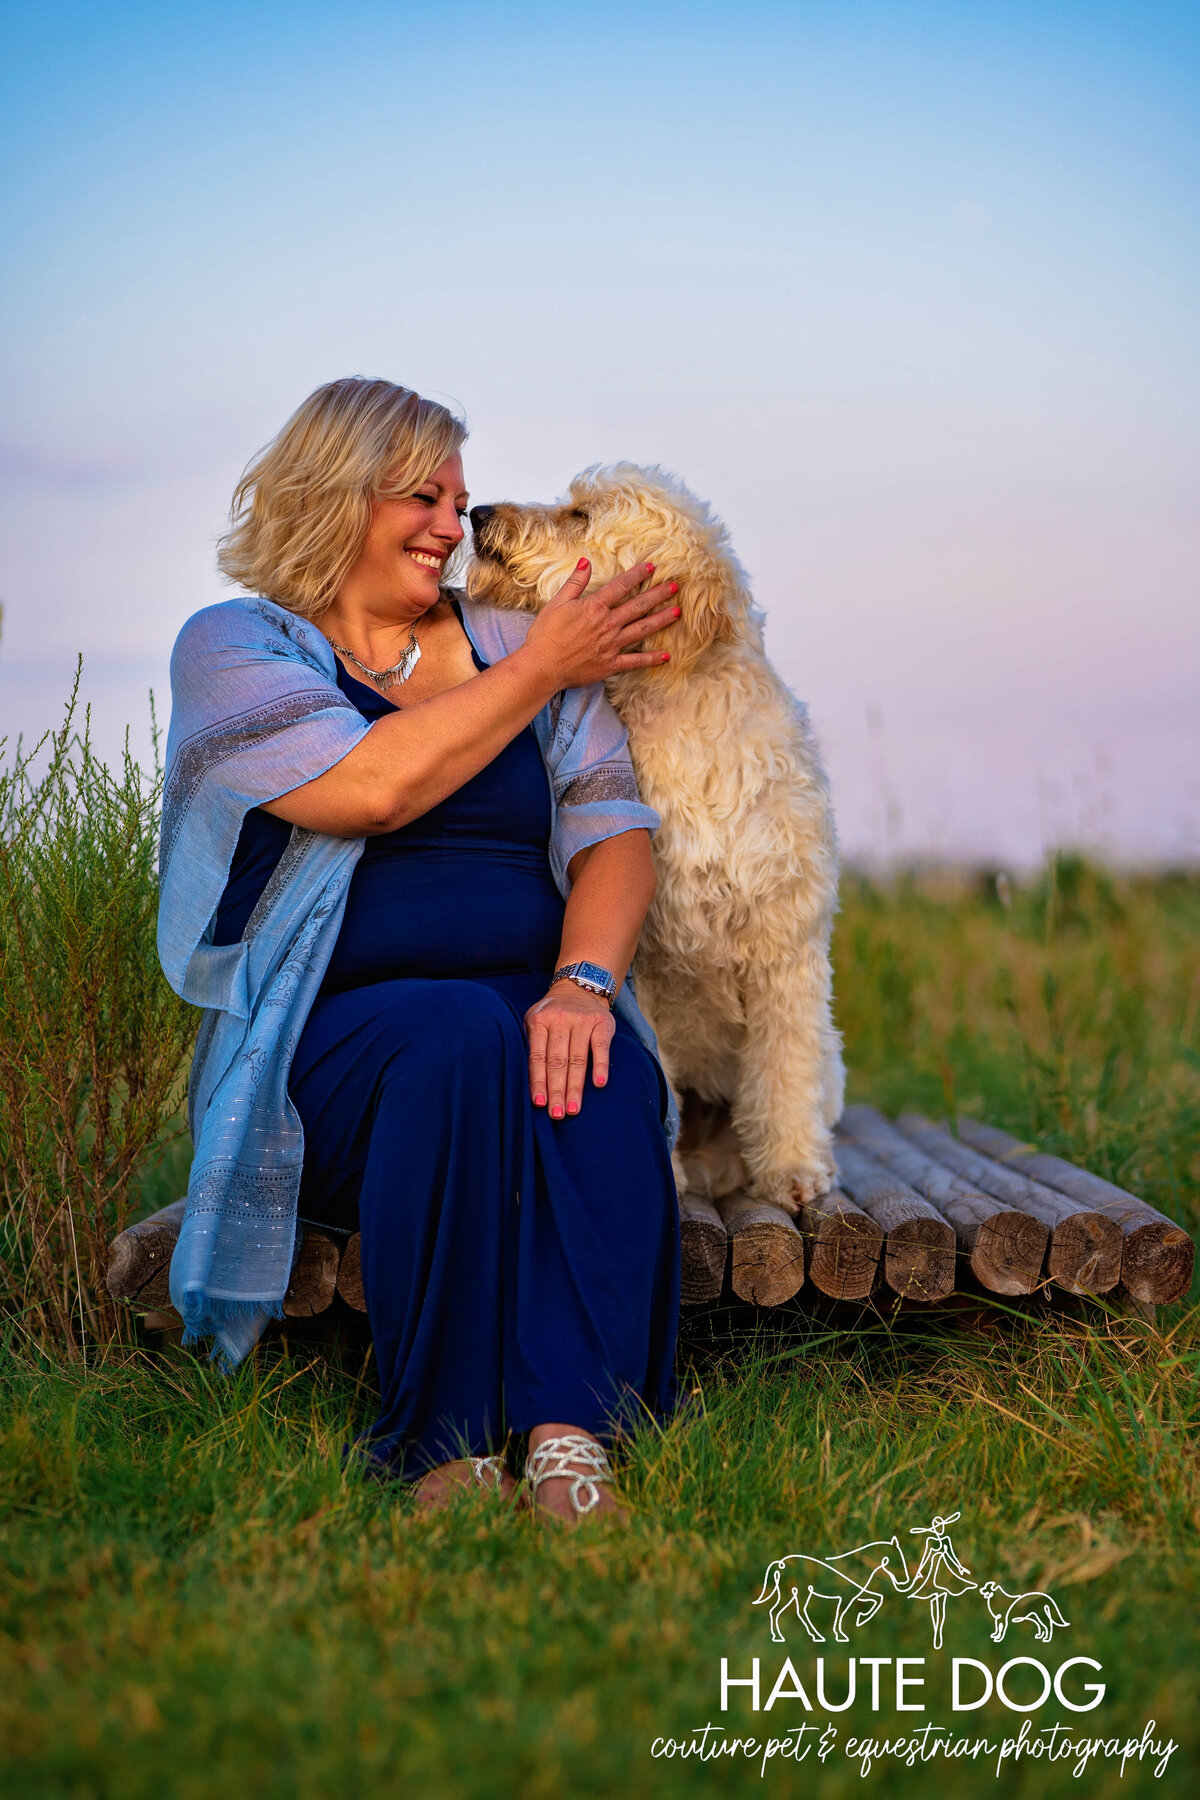 A woman and a Doodle dog with curly fur touching noses affectionately, with the woman wearing a smile on her face..